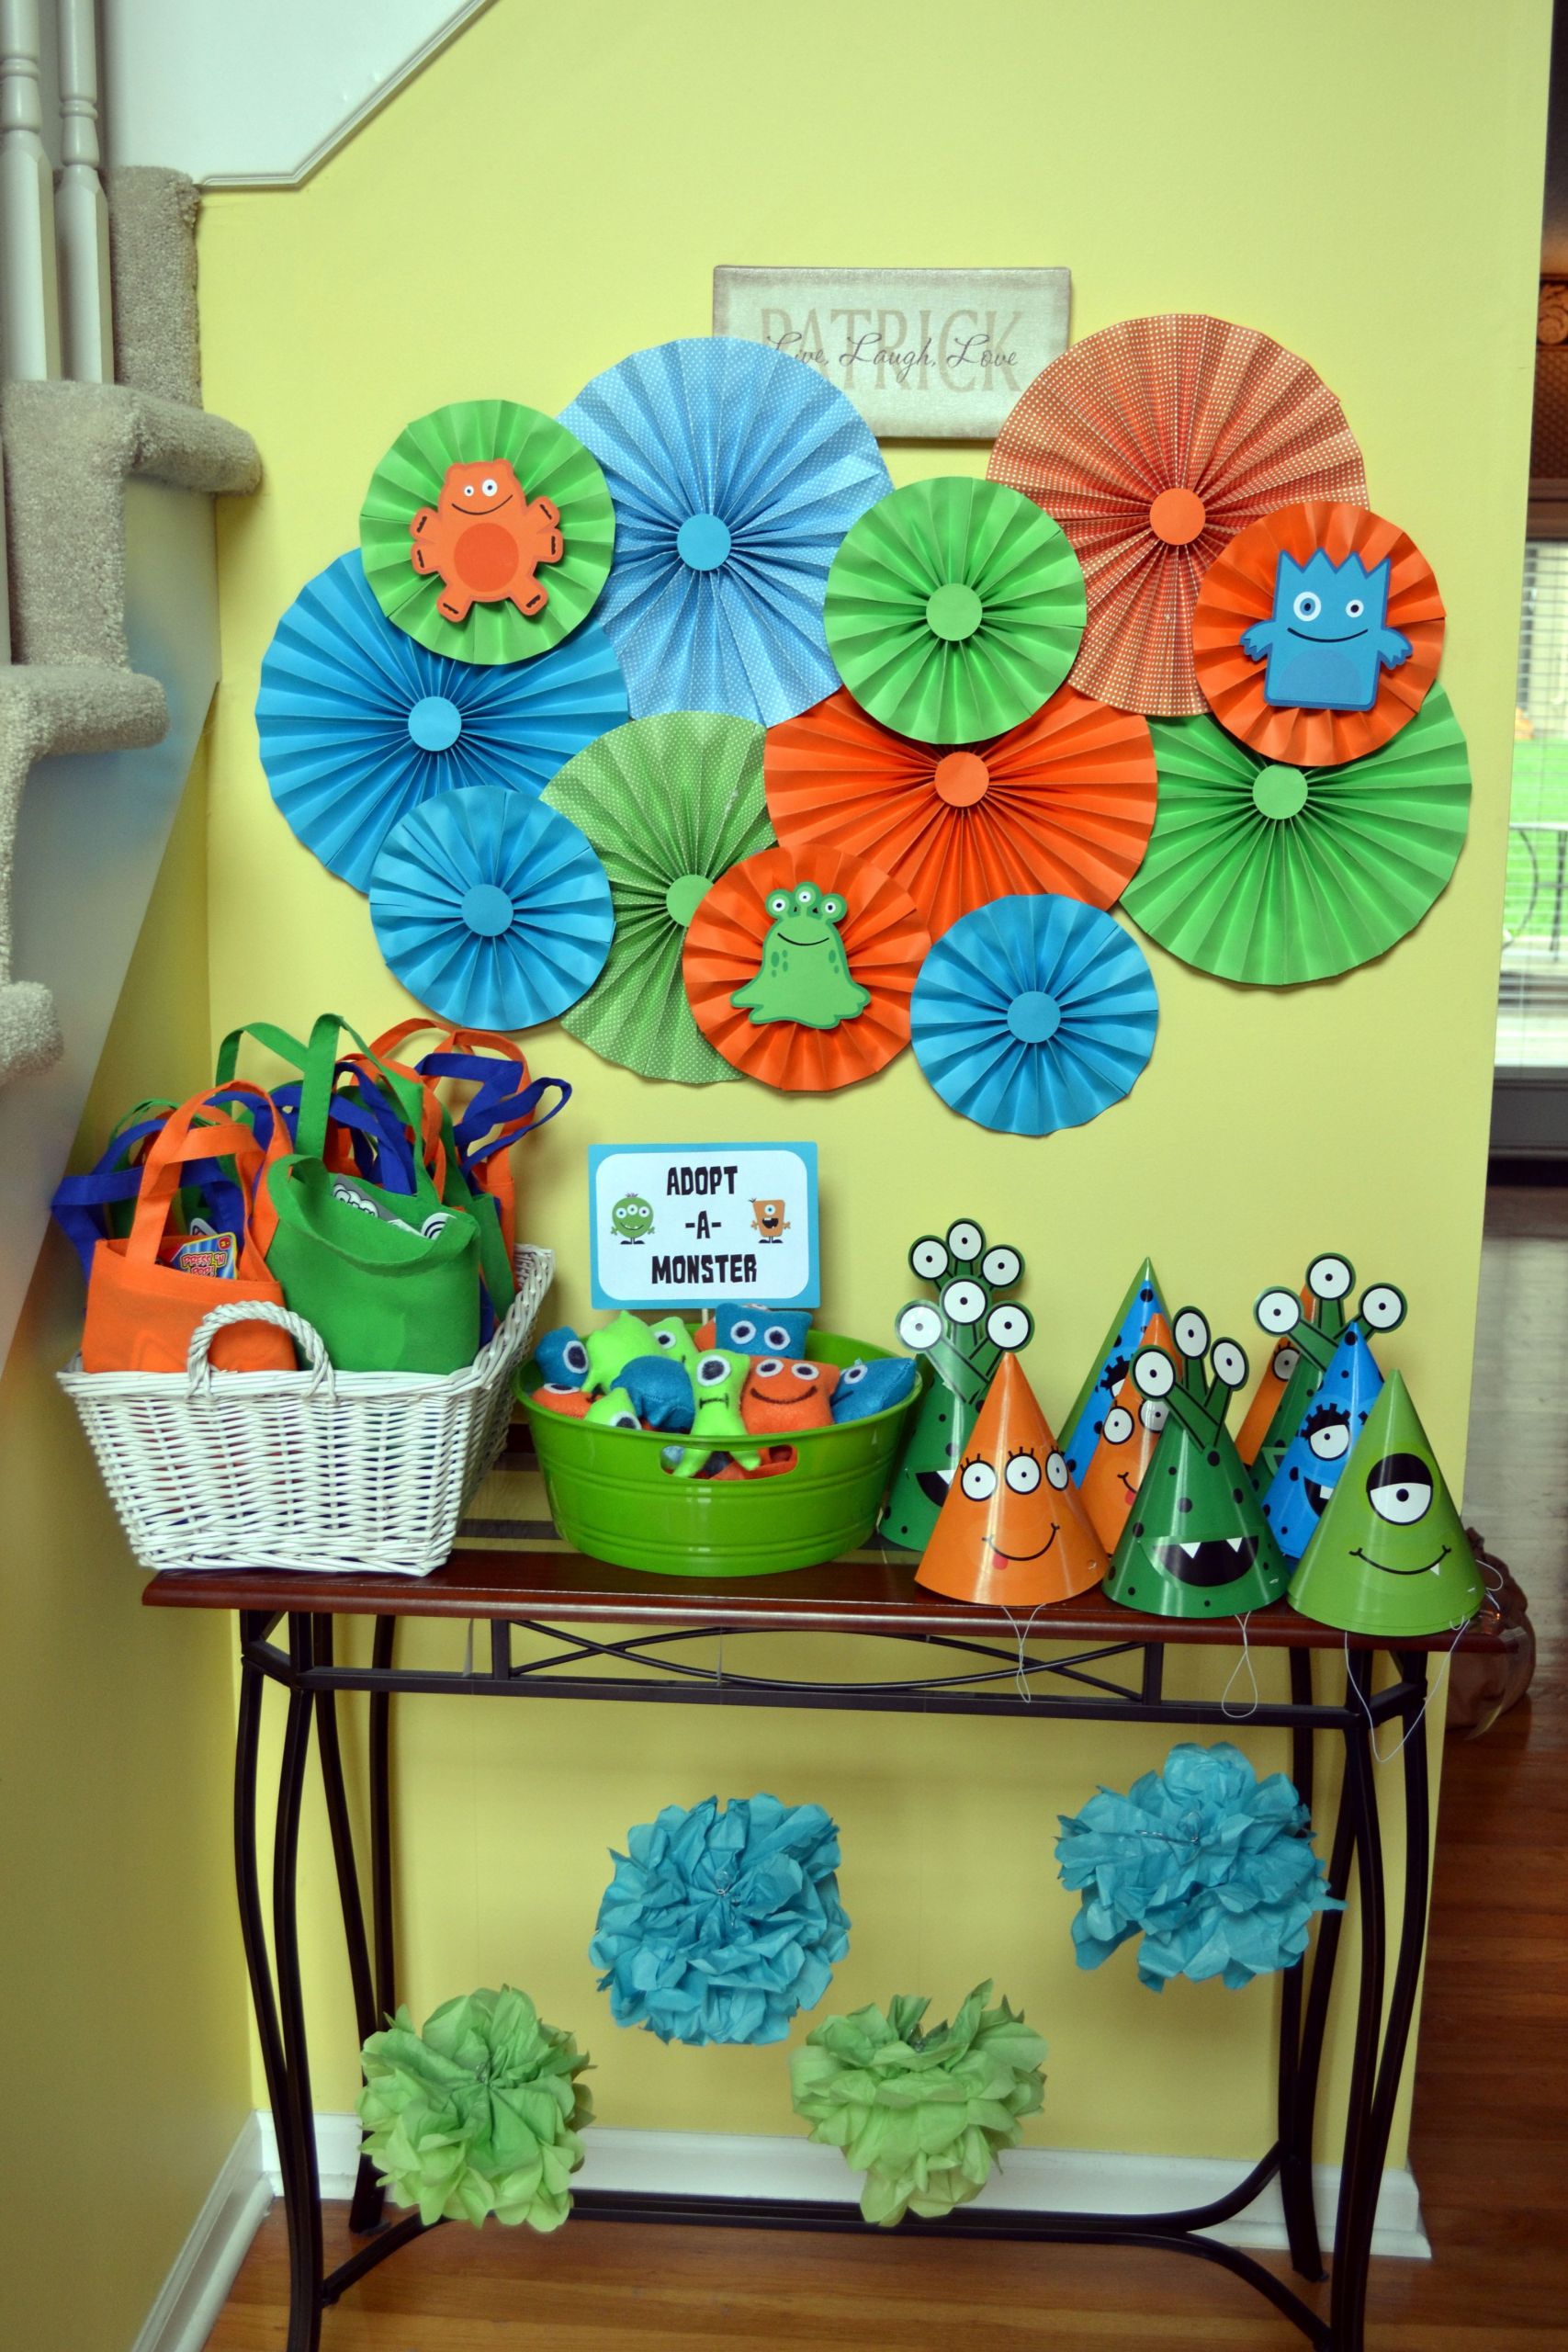 DIY Monster Party Decorations
 DIY Paper Medallions decorate the nook where the favor